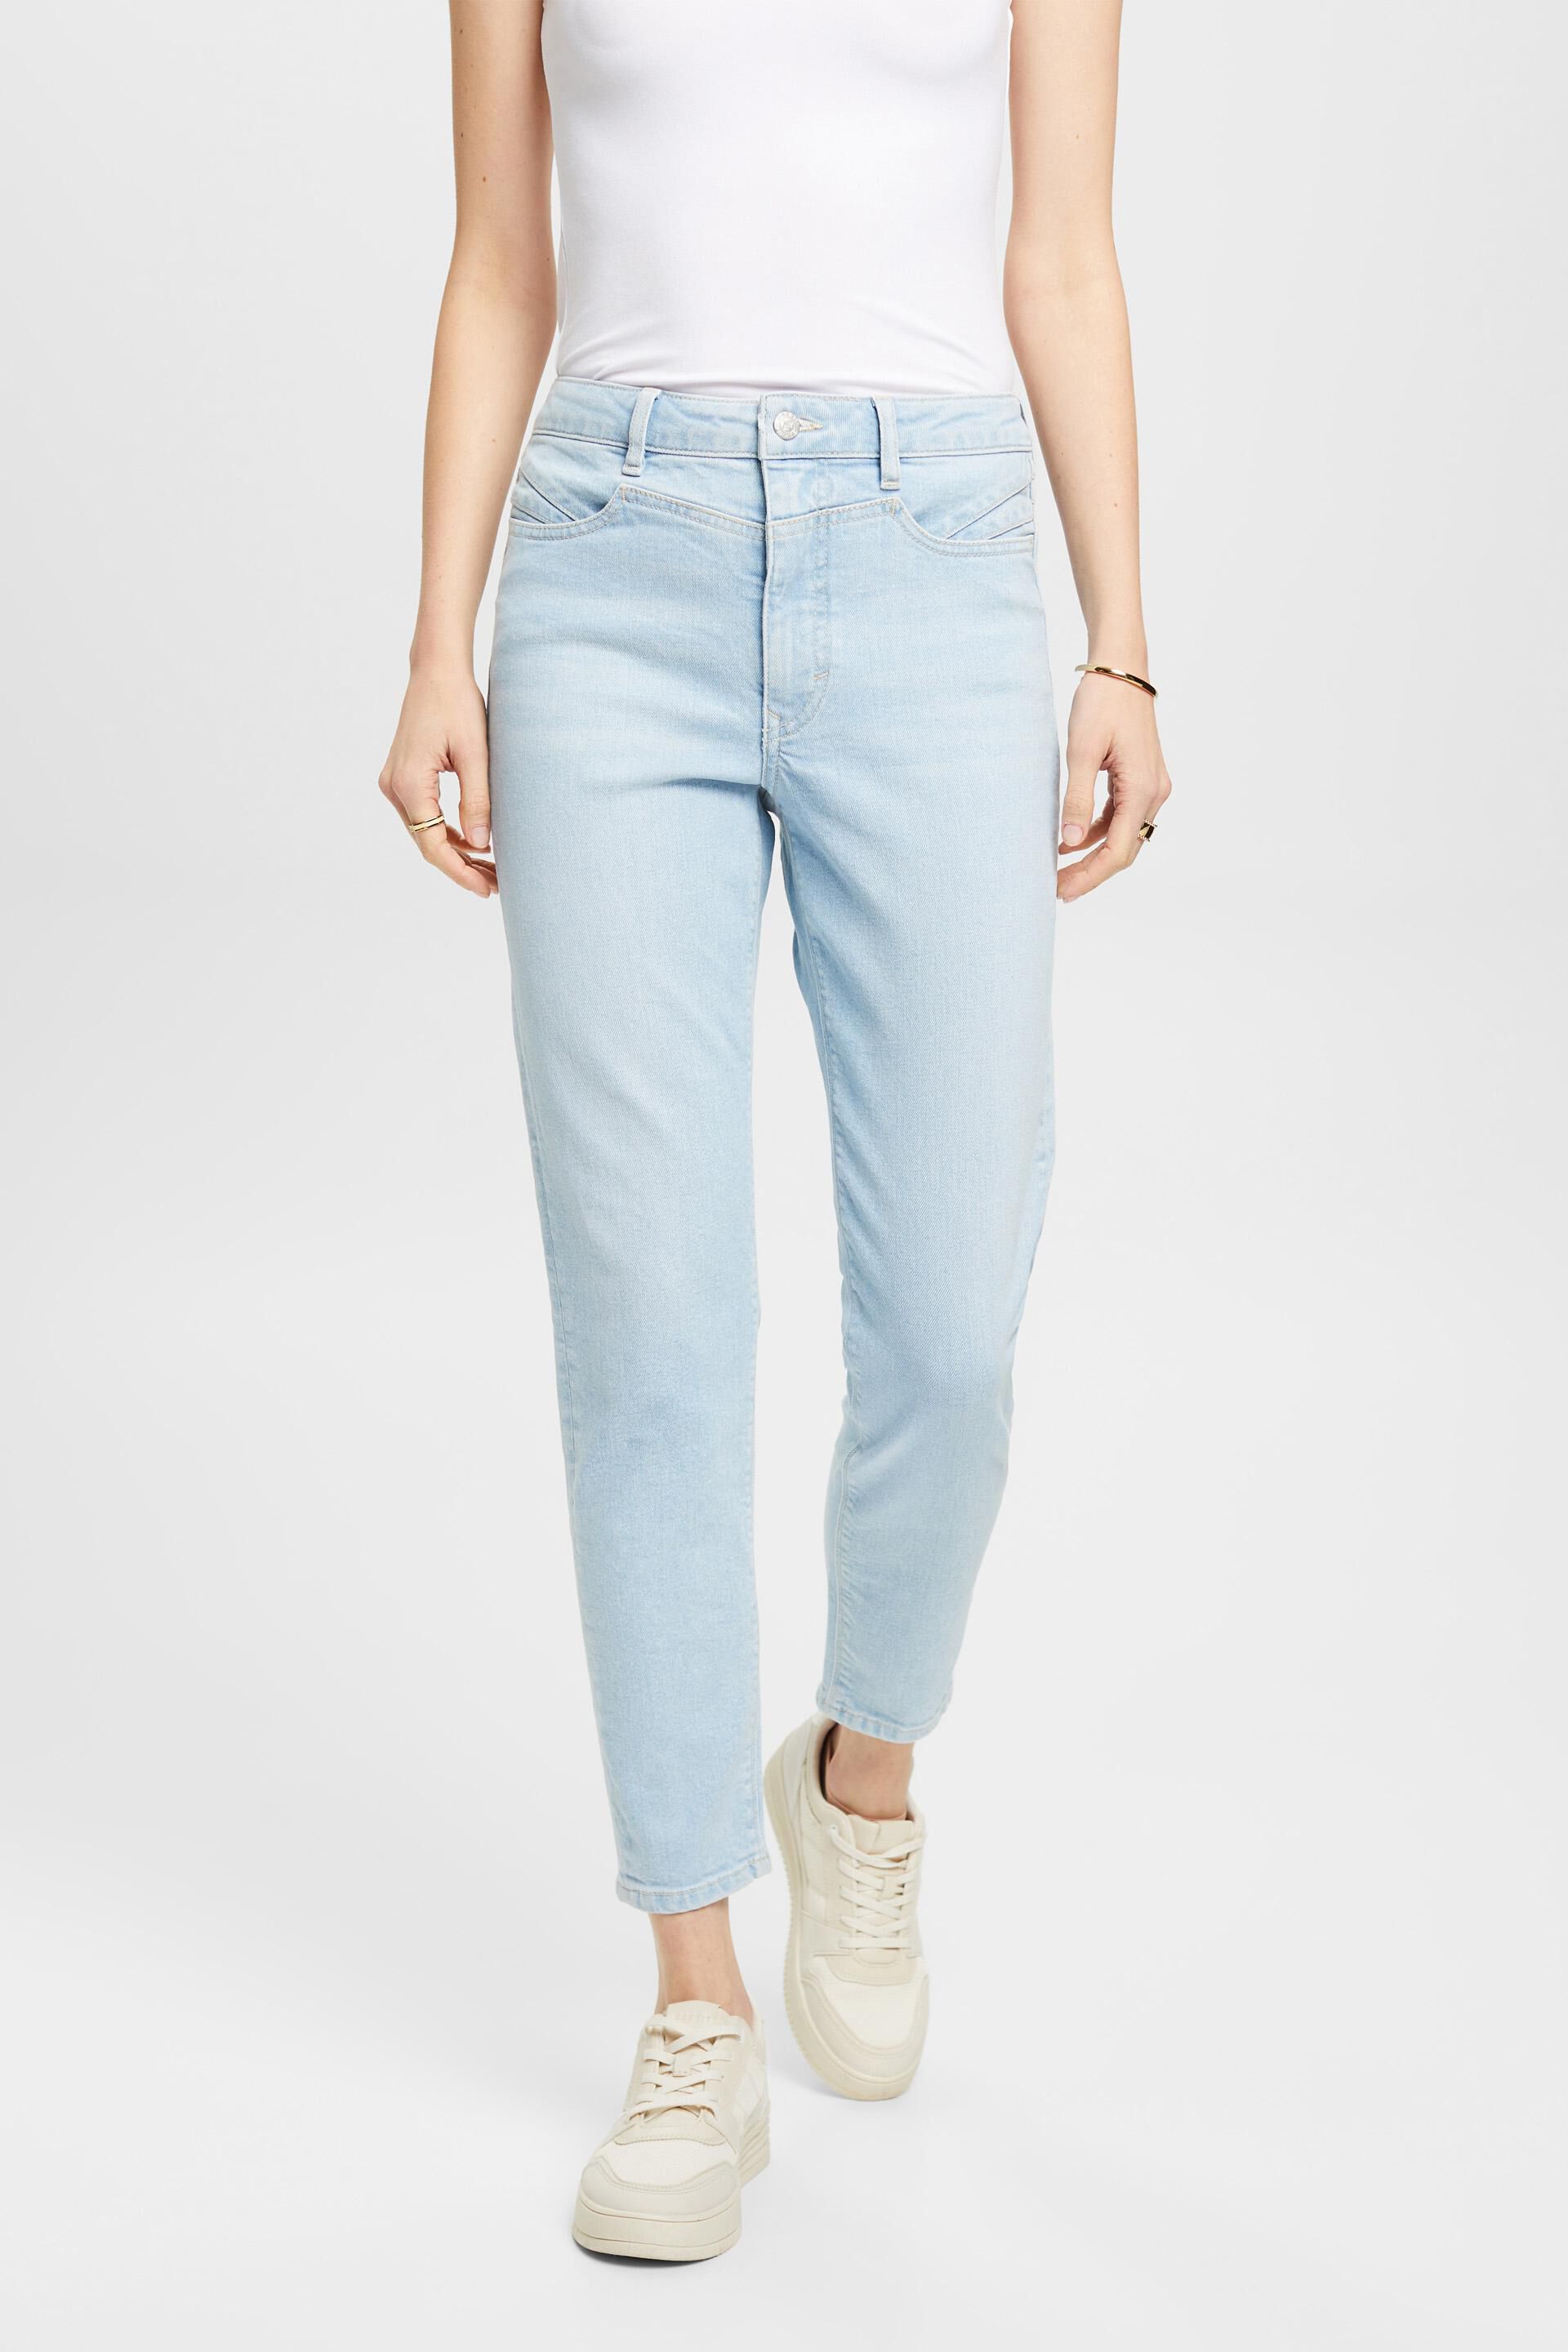 Buy Blue Jeans & Jeggings for Women by Pepe Jeans Online | Ajio.com